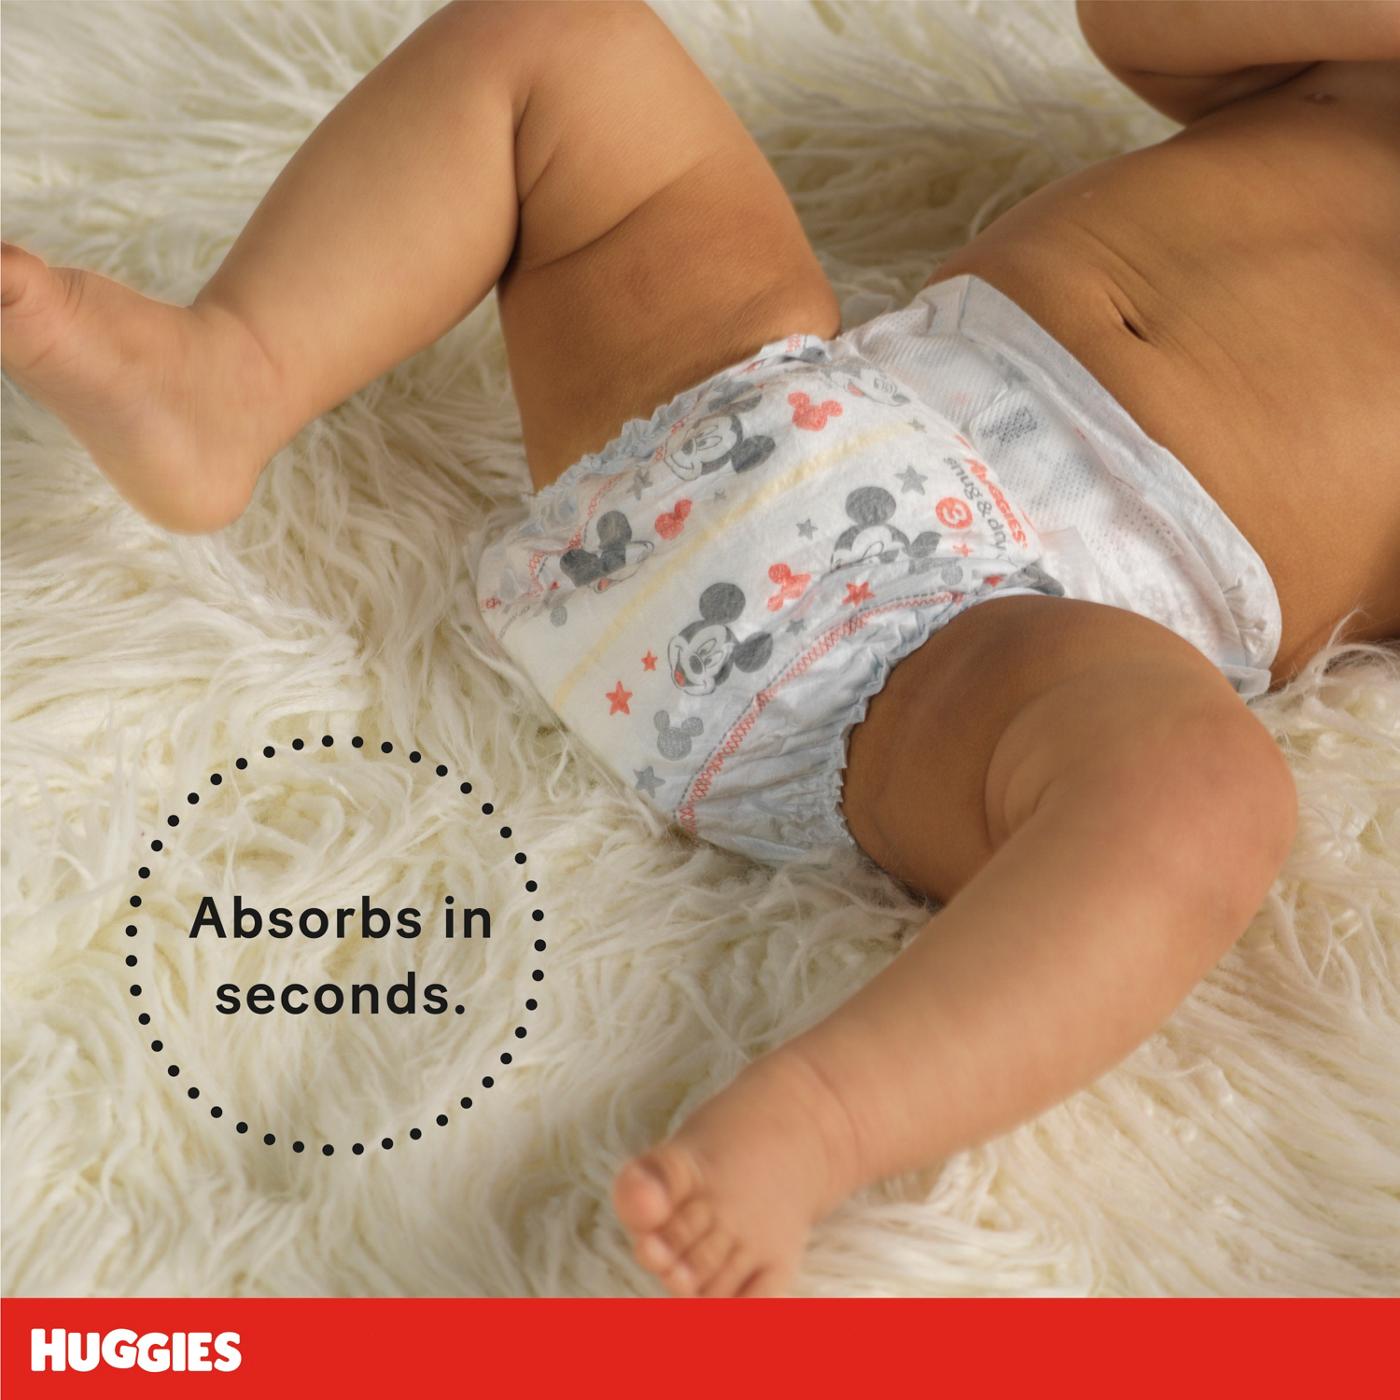 Huggies Snug & Dry Baby Diapers, Size 1 - Shop Diapers at H-E-B